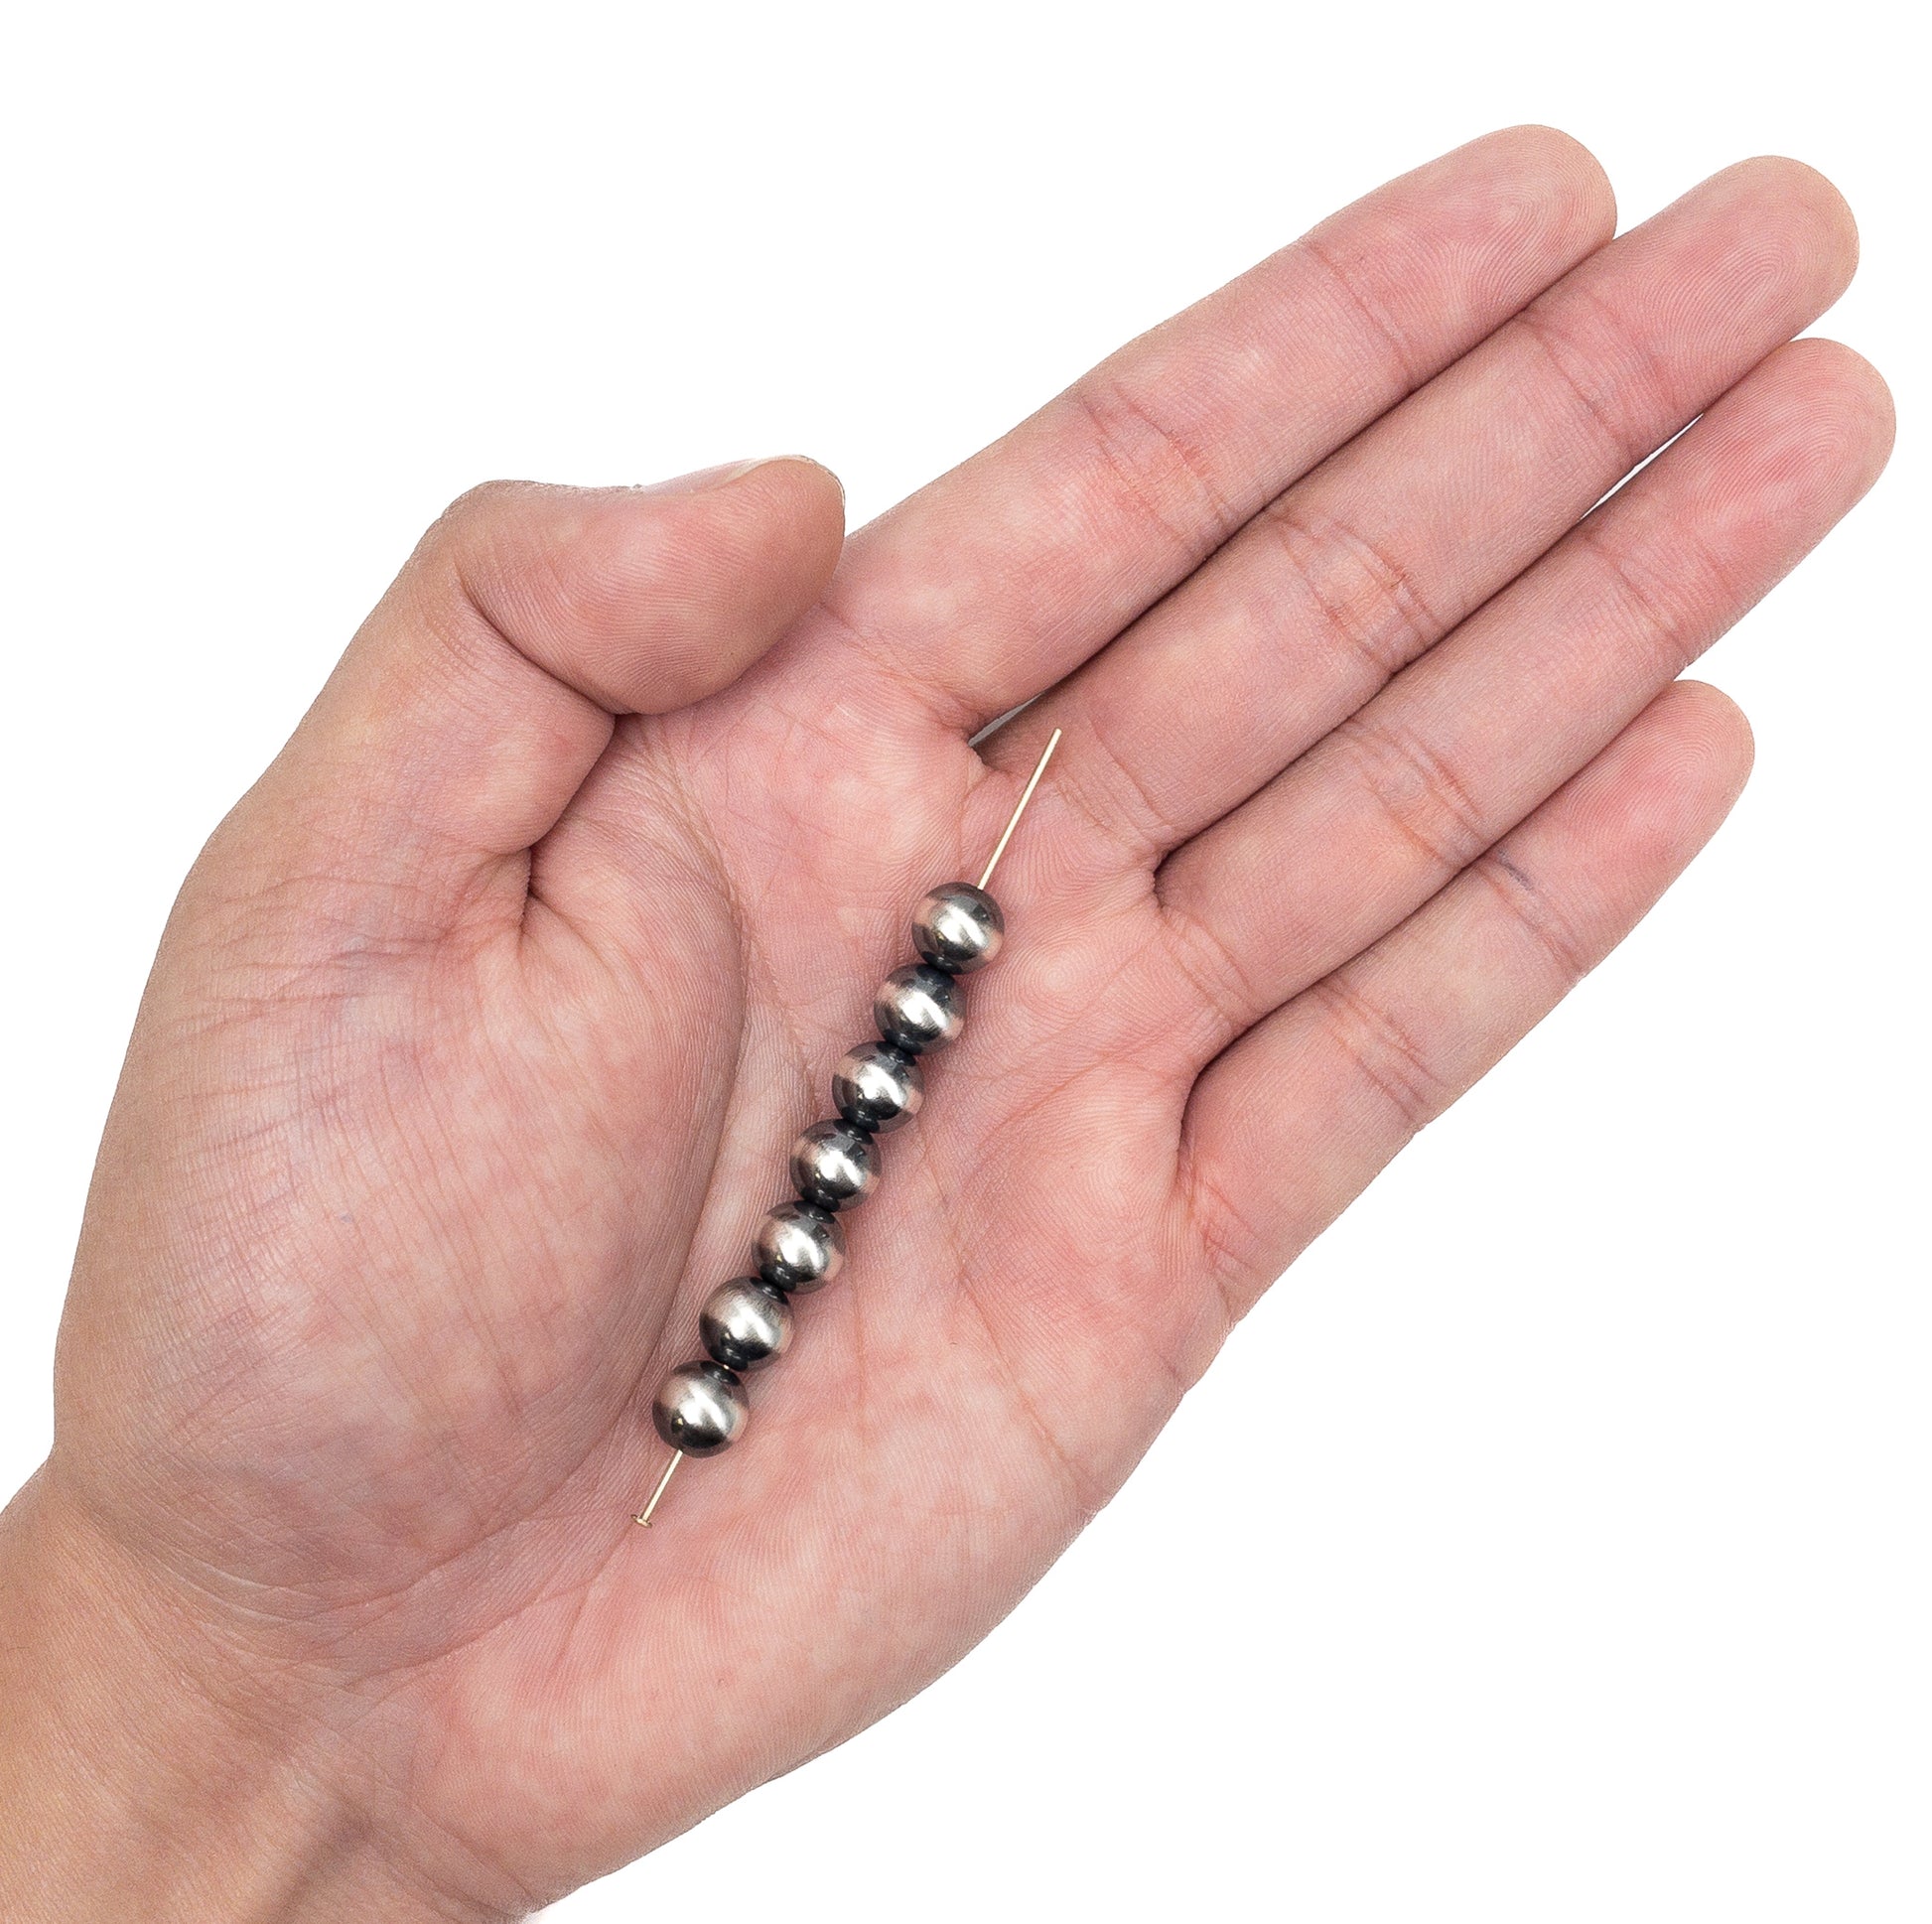 8mm Navajo Smooth Round Bead (Oxidized Sterling Silver) - 1 pc.